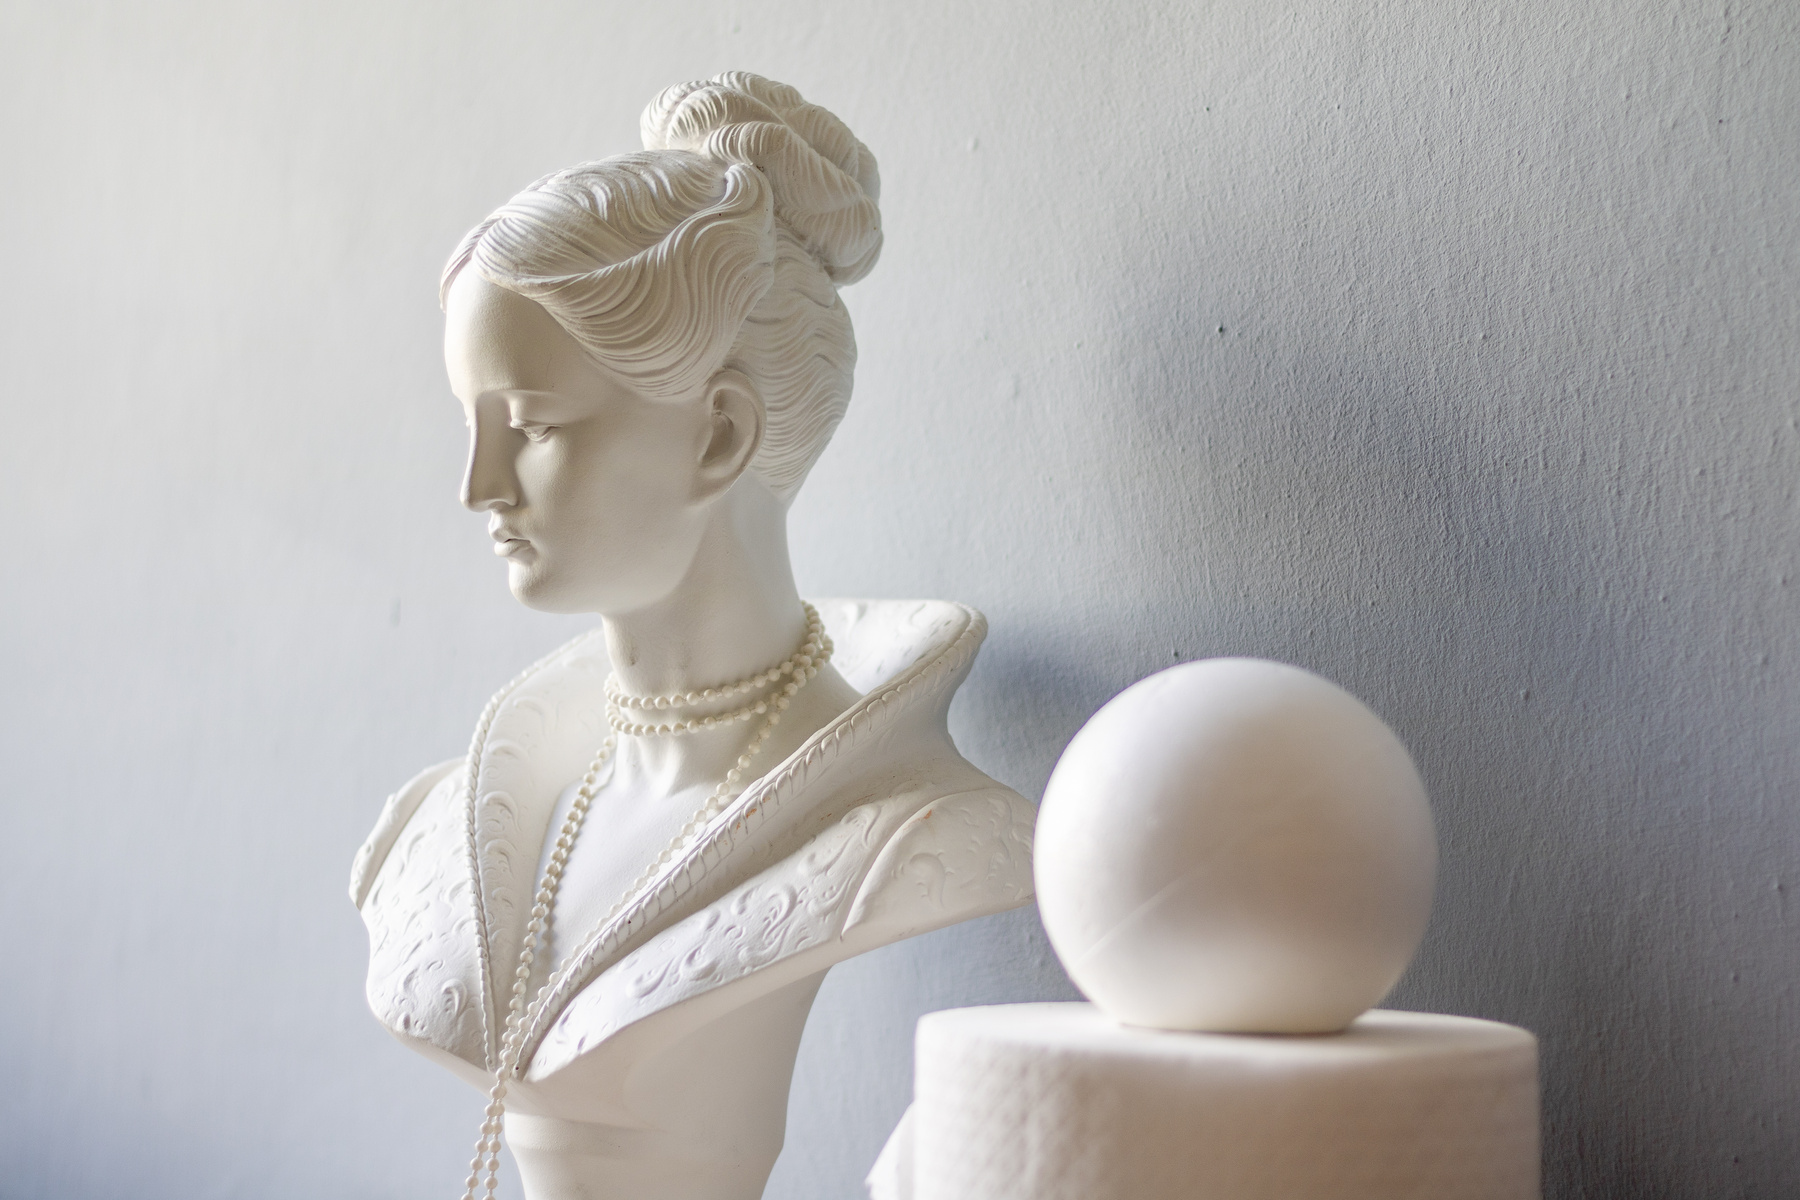 Bust of a Woman Wearing Pearls